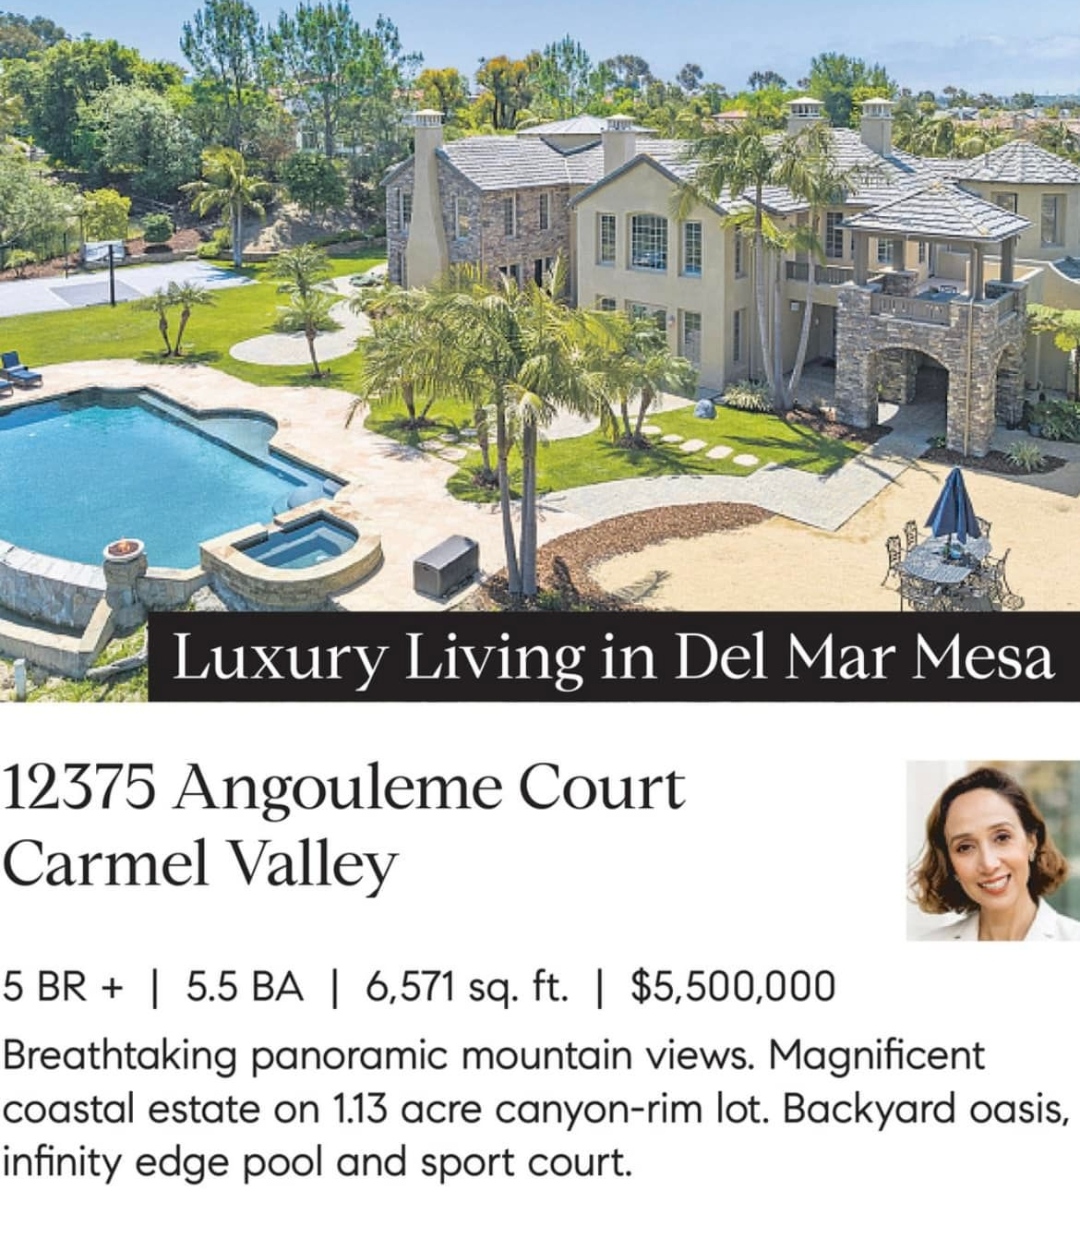 Last Sunday (5/14) San Diego Union-Tribune newspaper featured my listing. Here is the add: